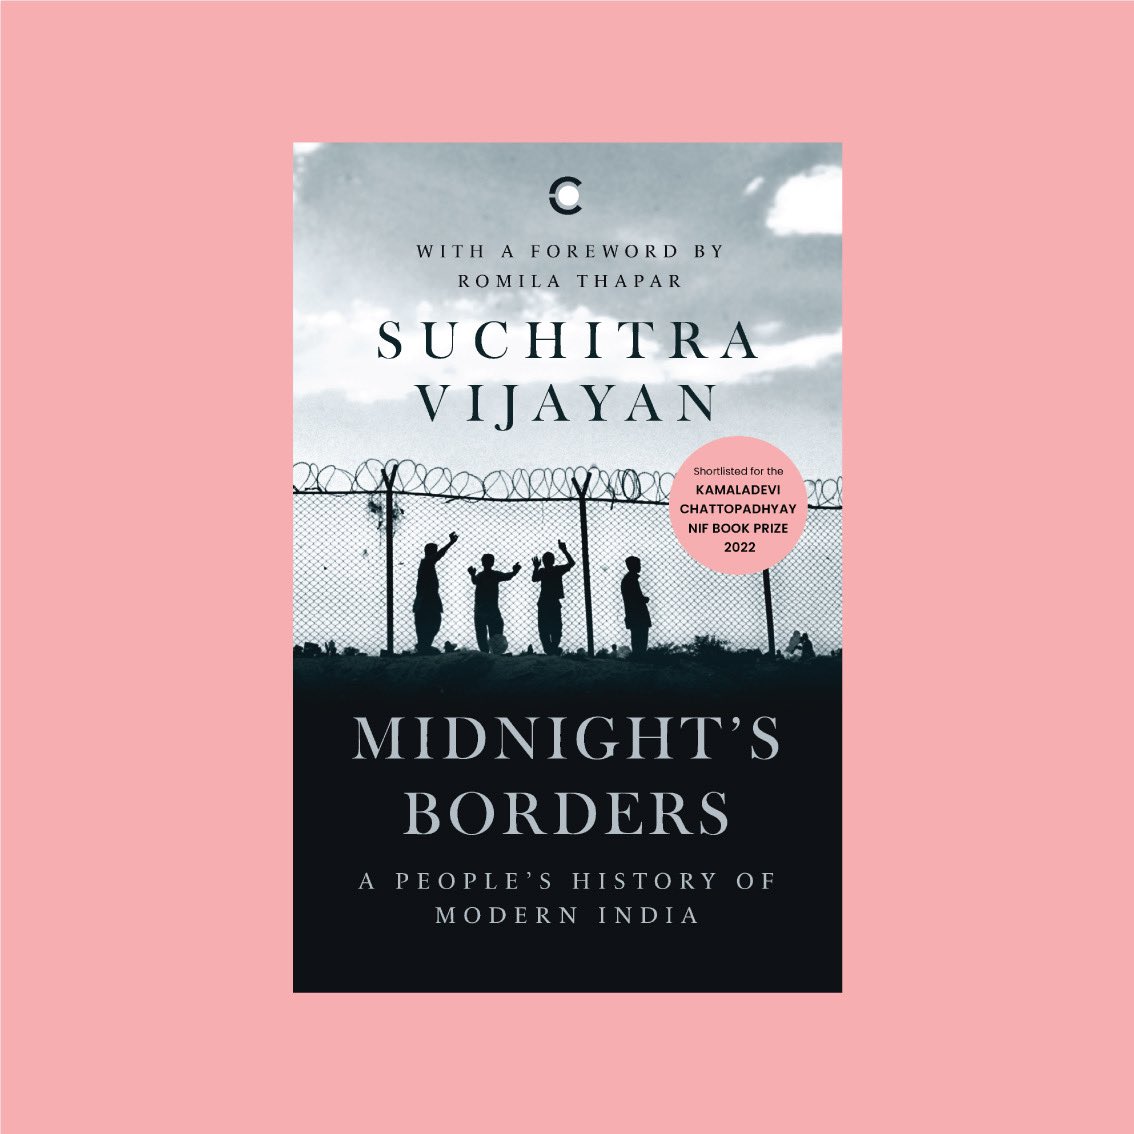 #ReadandElect @suchitrav’s compelling narrative delves into the ever-changing relationship between nations and borders, looking at how borders define people and their nationalism. Pick up Midnight’s Borders this #Election2024 season. @ContextIndia #GeneralElections2024